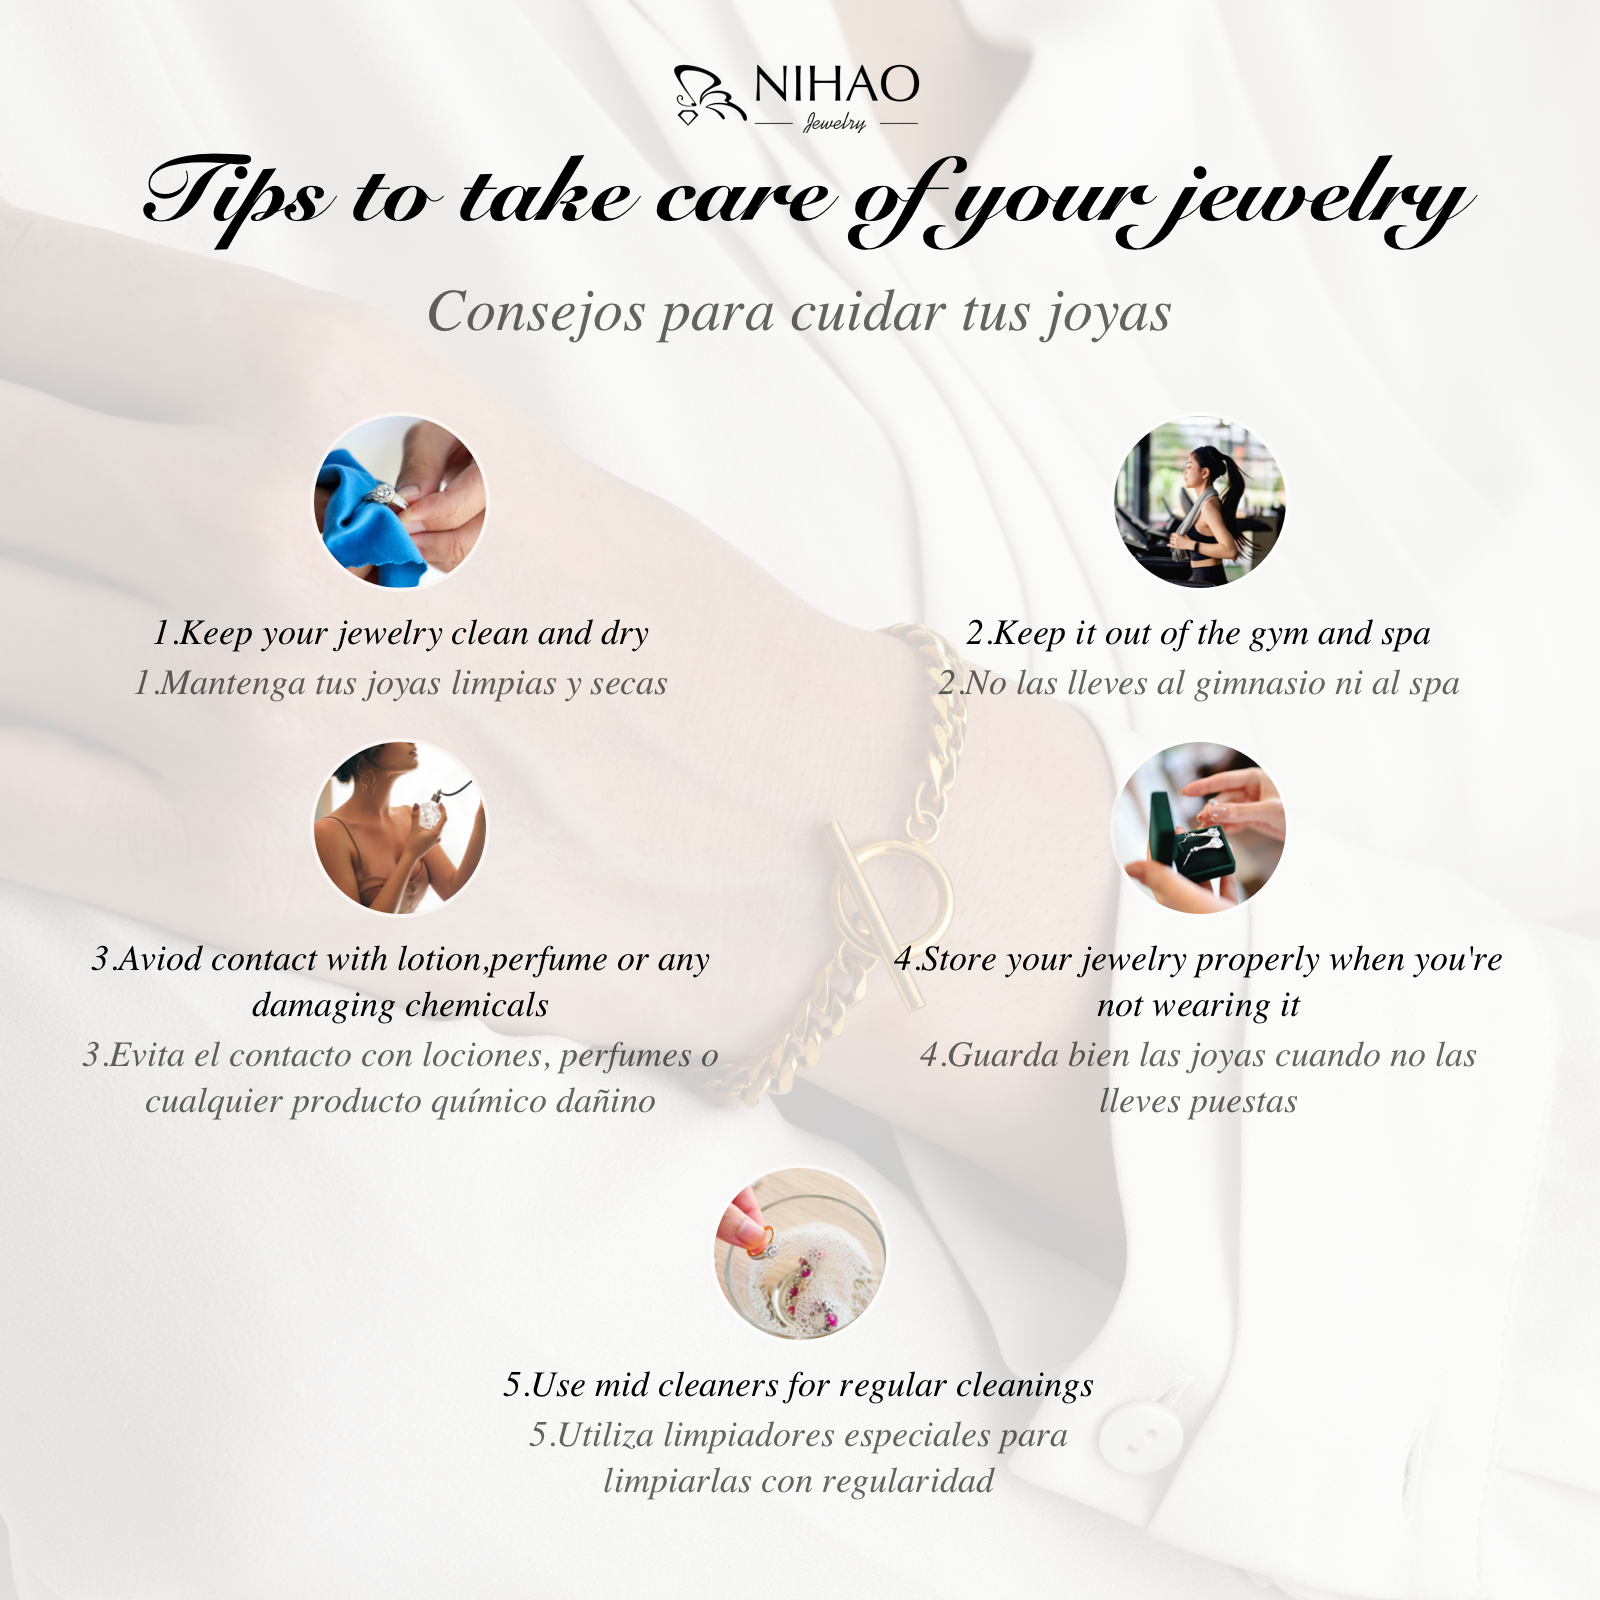 5 tips to take care of your jewelry